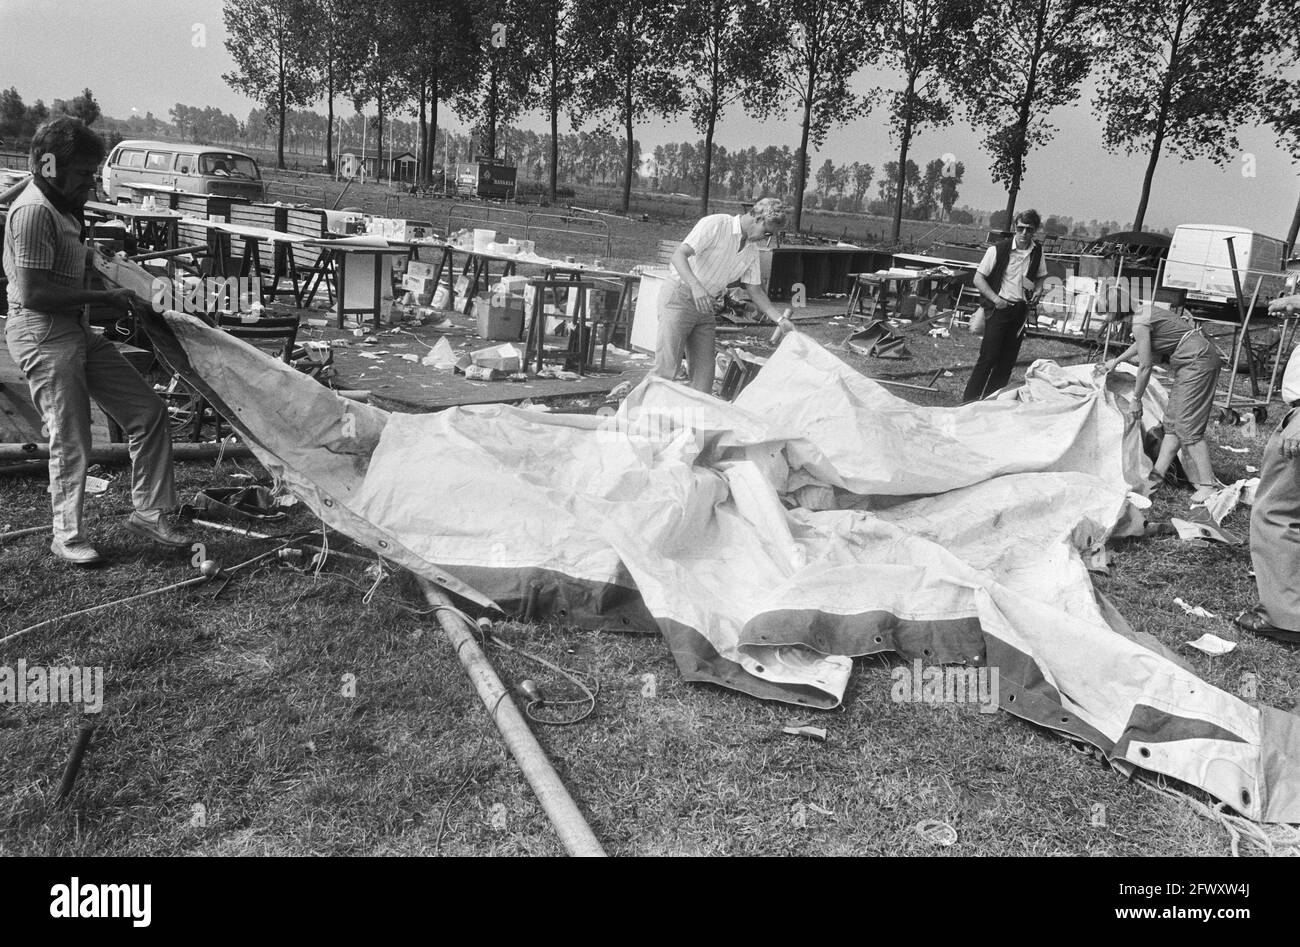 Investigators examine parts of tent, July 18, 1983, disasters, detective, tents, whirlwinds, The Netherlands, 20th century press agency photo, news to Stock Photo